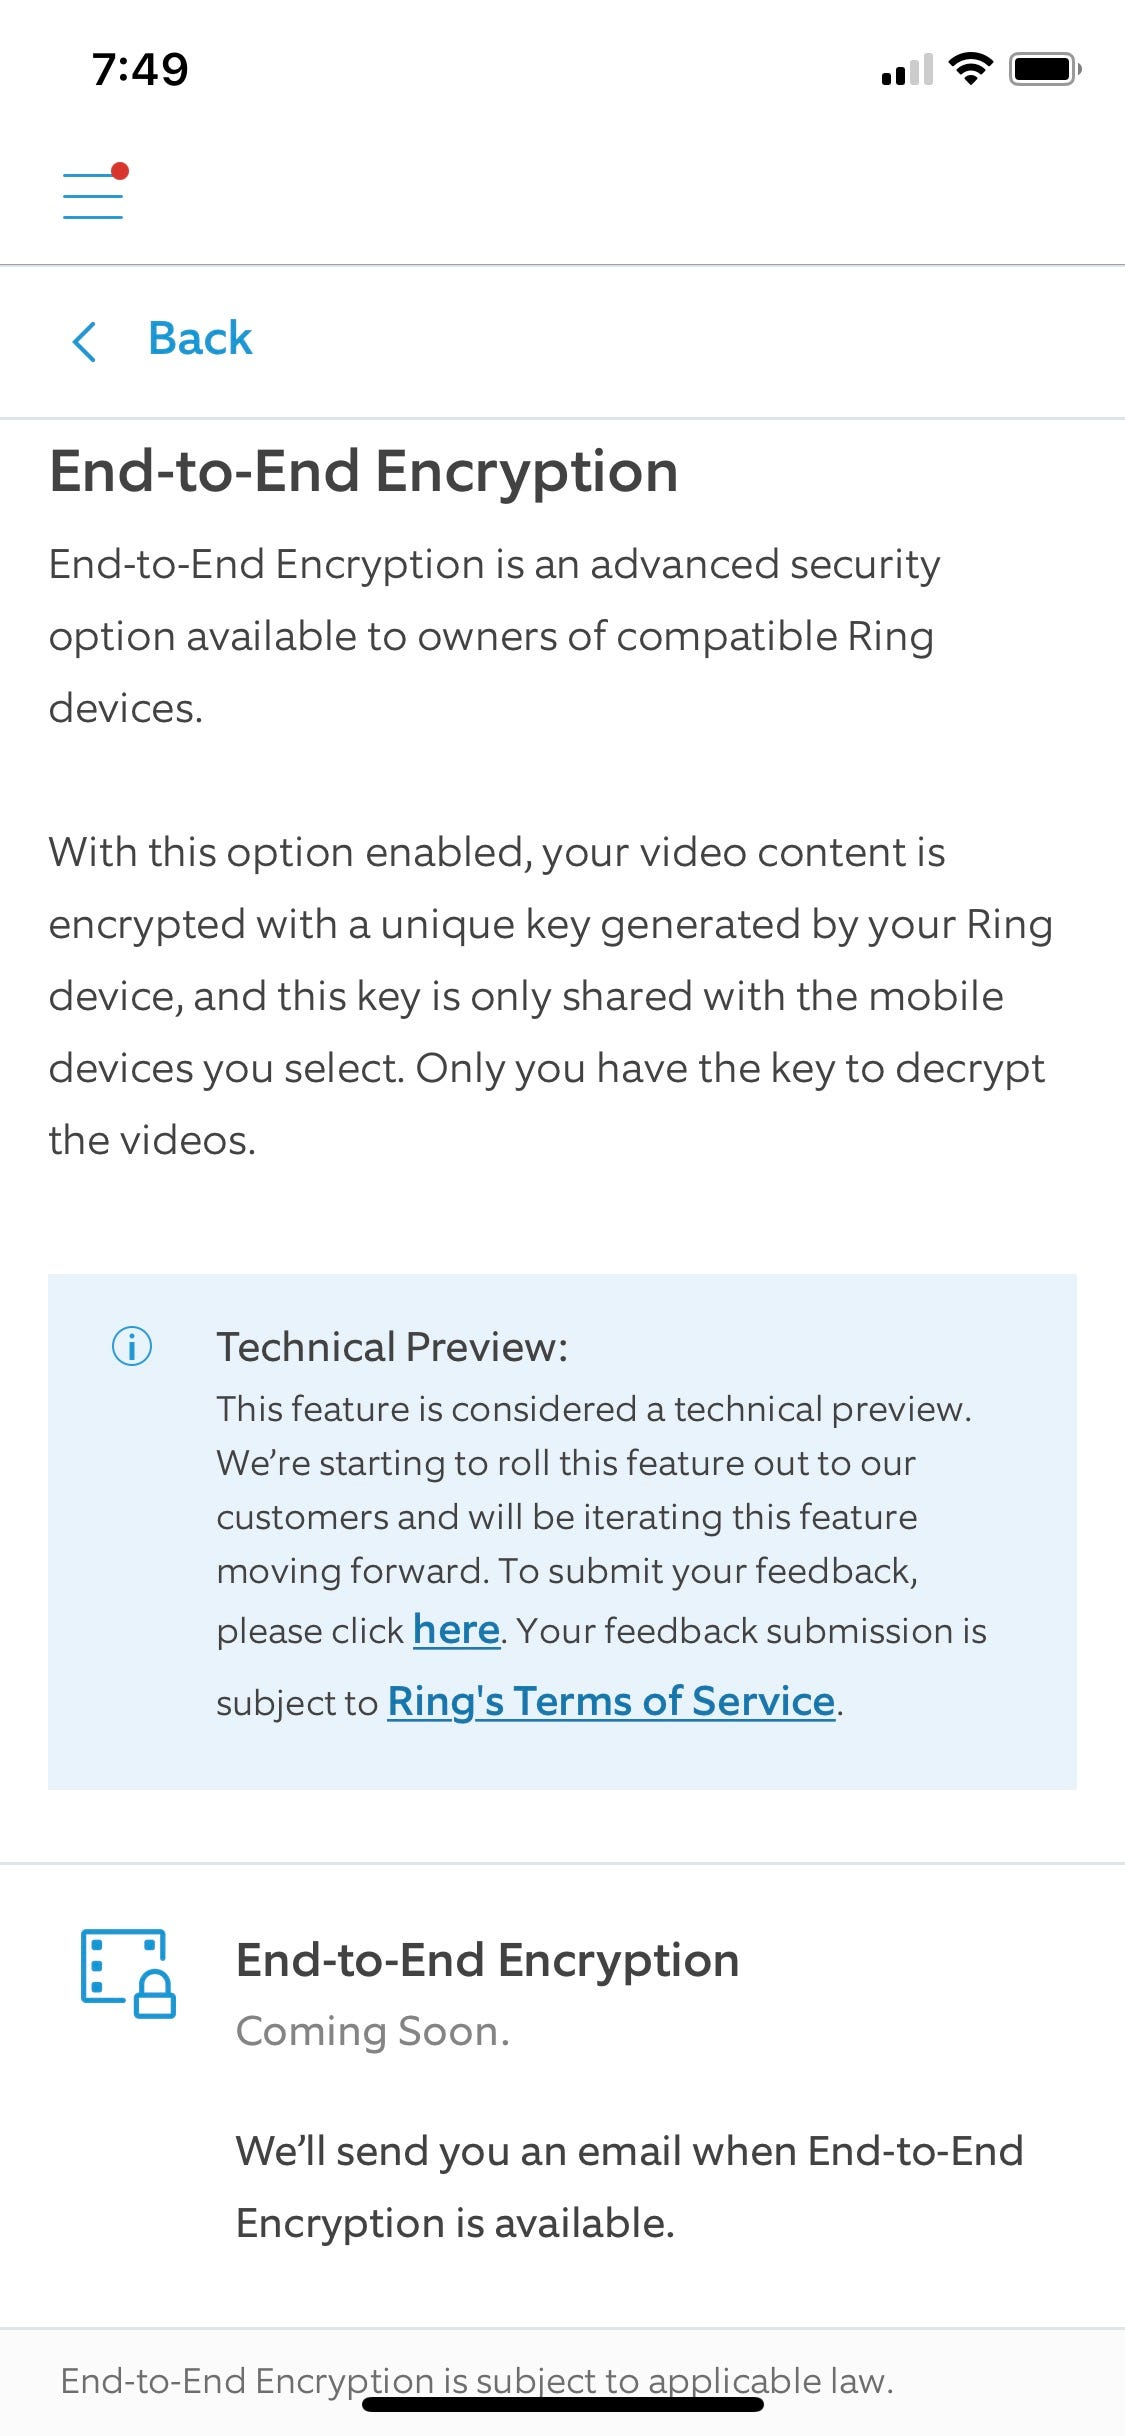 Ring's End-to-End Encryption: What it Means